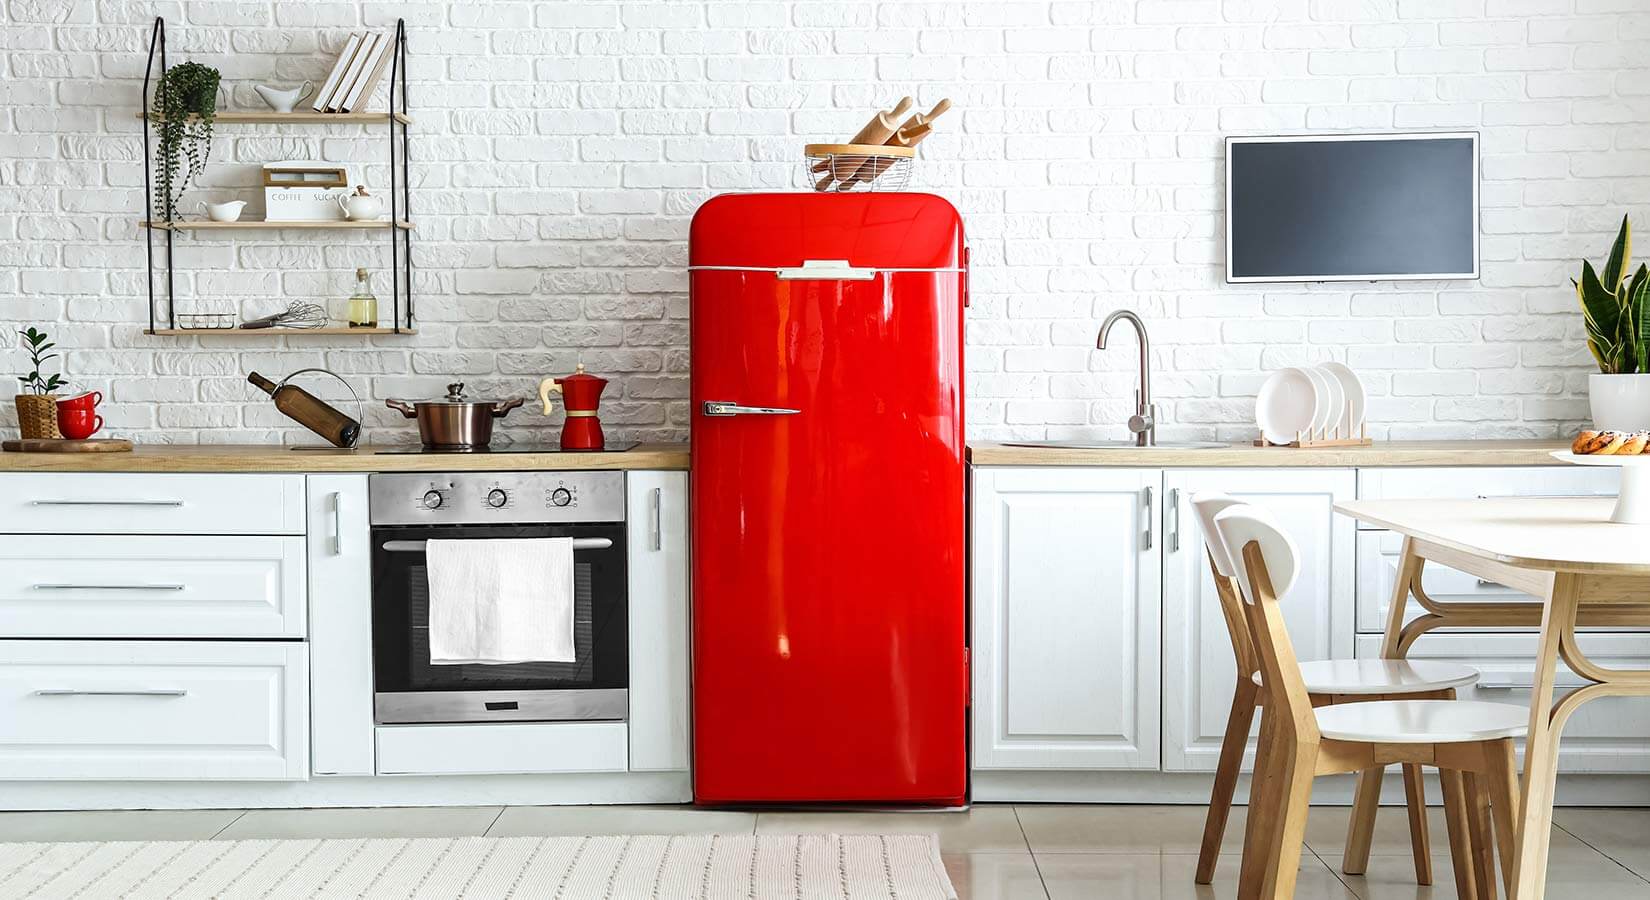 Small single-wall kitchen with white cabinets and bright red refrigerator.